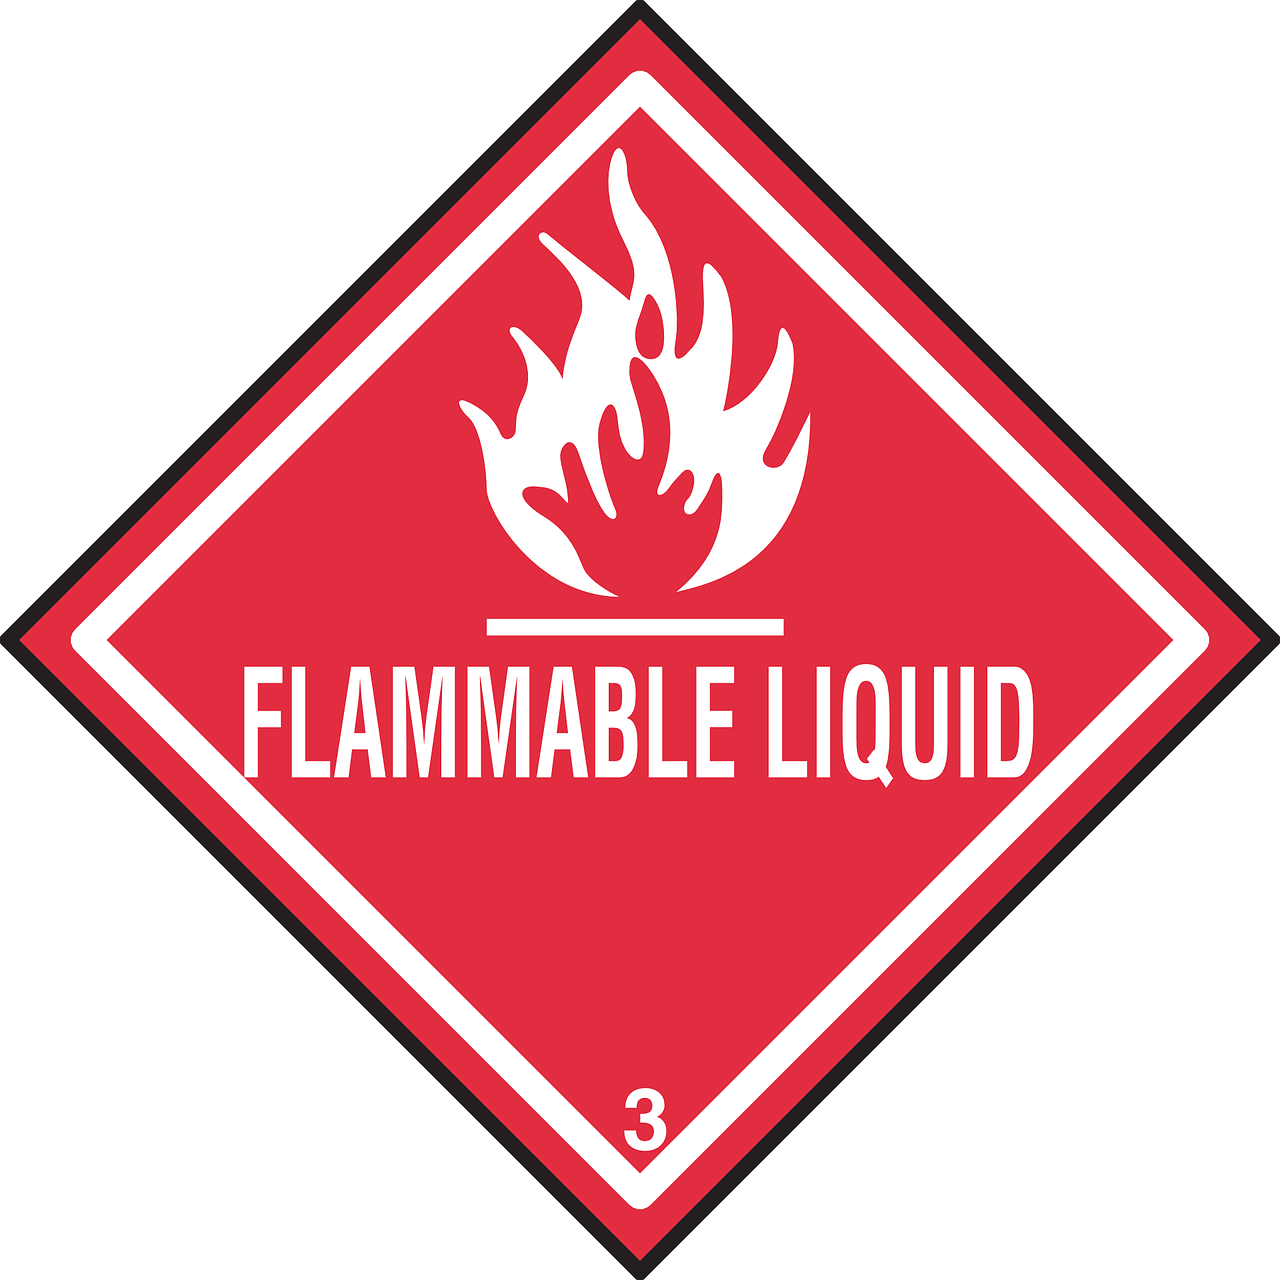 a flammable liquid sign on a white background, a picture, by Wayne England, renaissance, front label, red liquid, y 3, diamond